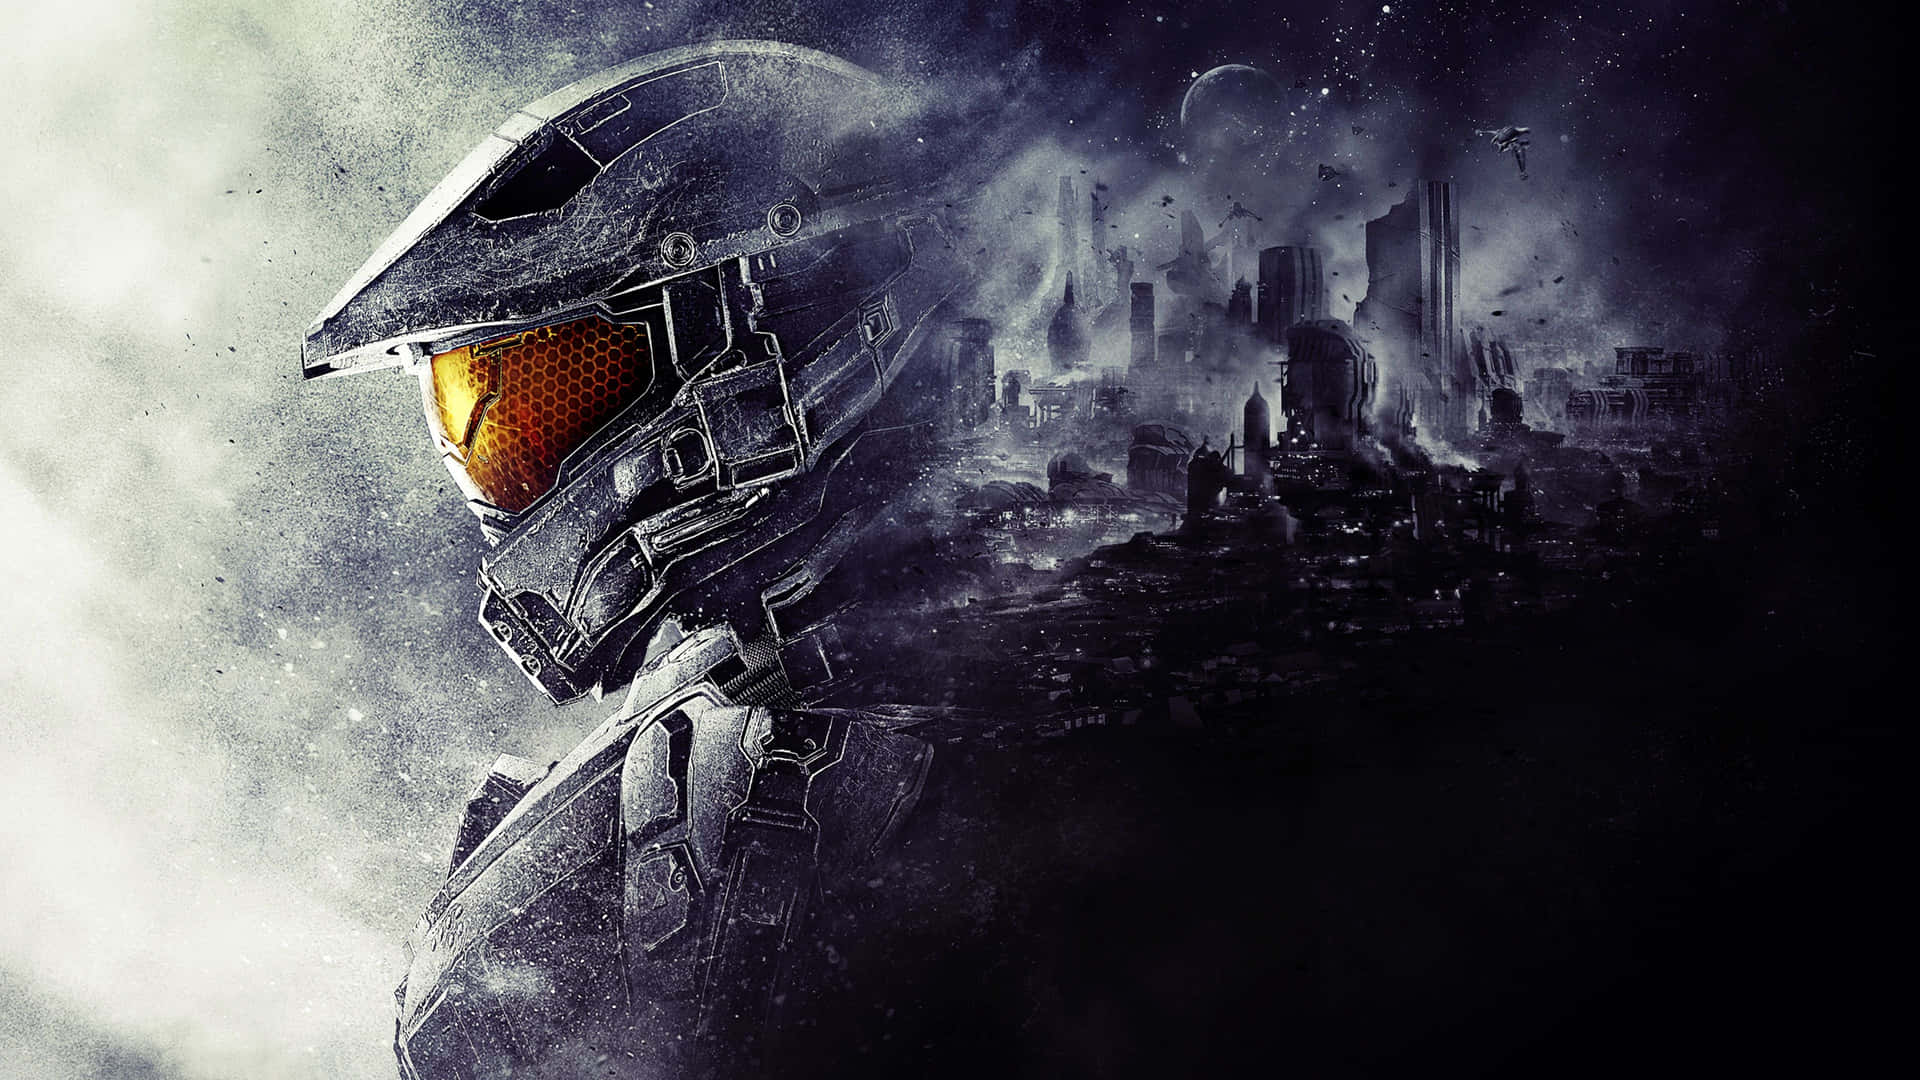 “Gear up for a lifetime of adventure with Halo's Master Chief." Wallpaper